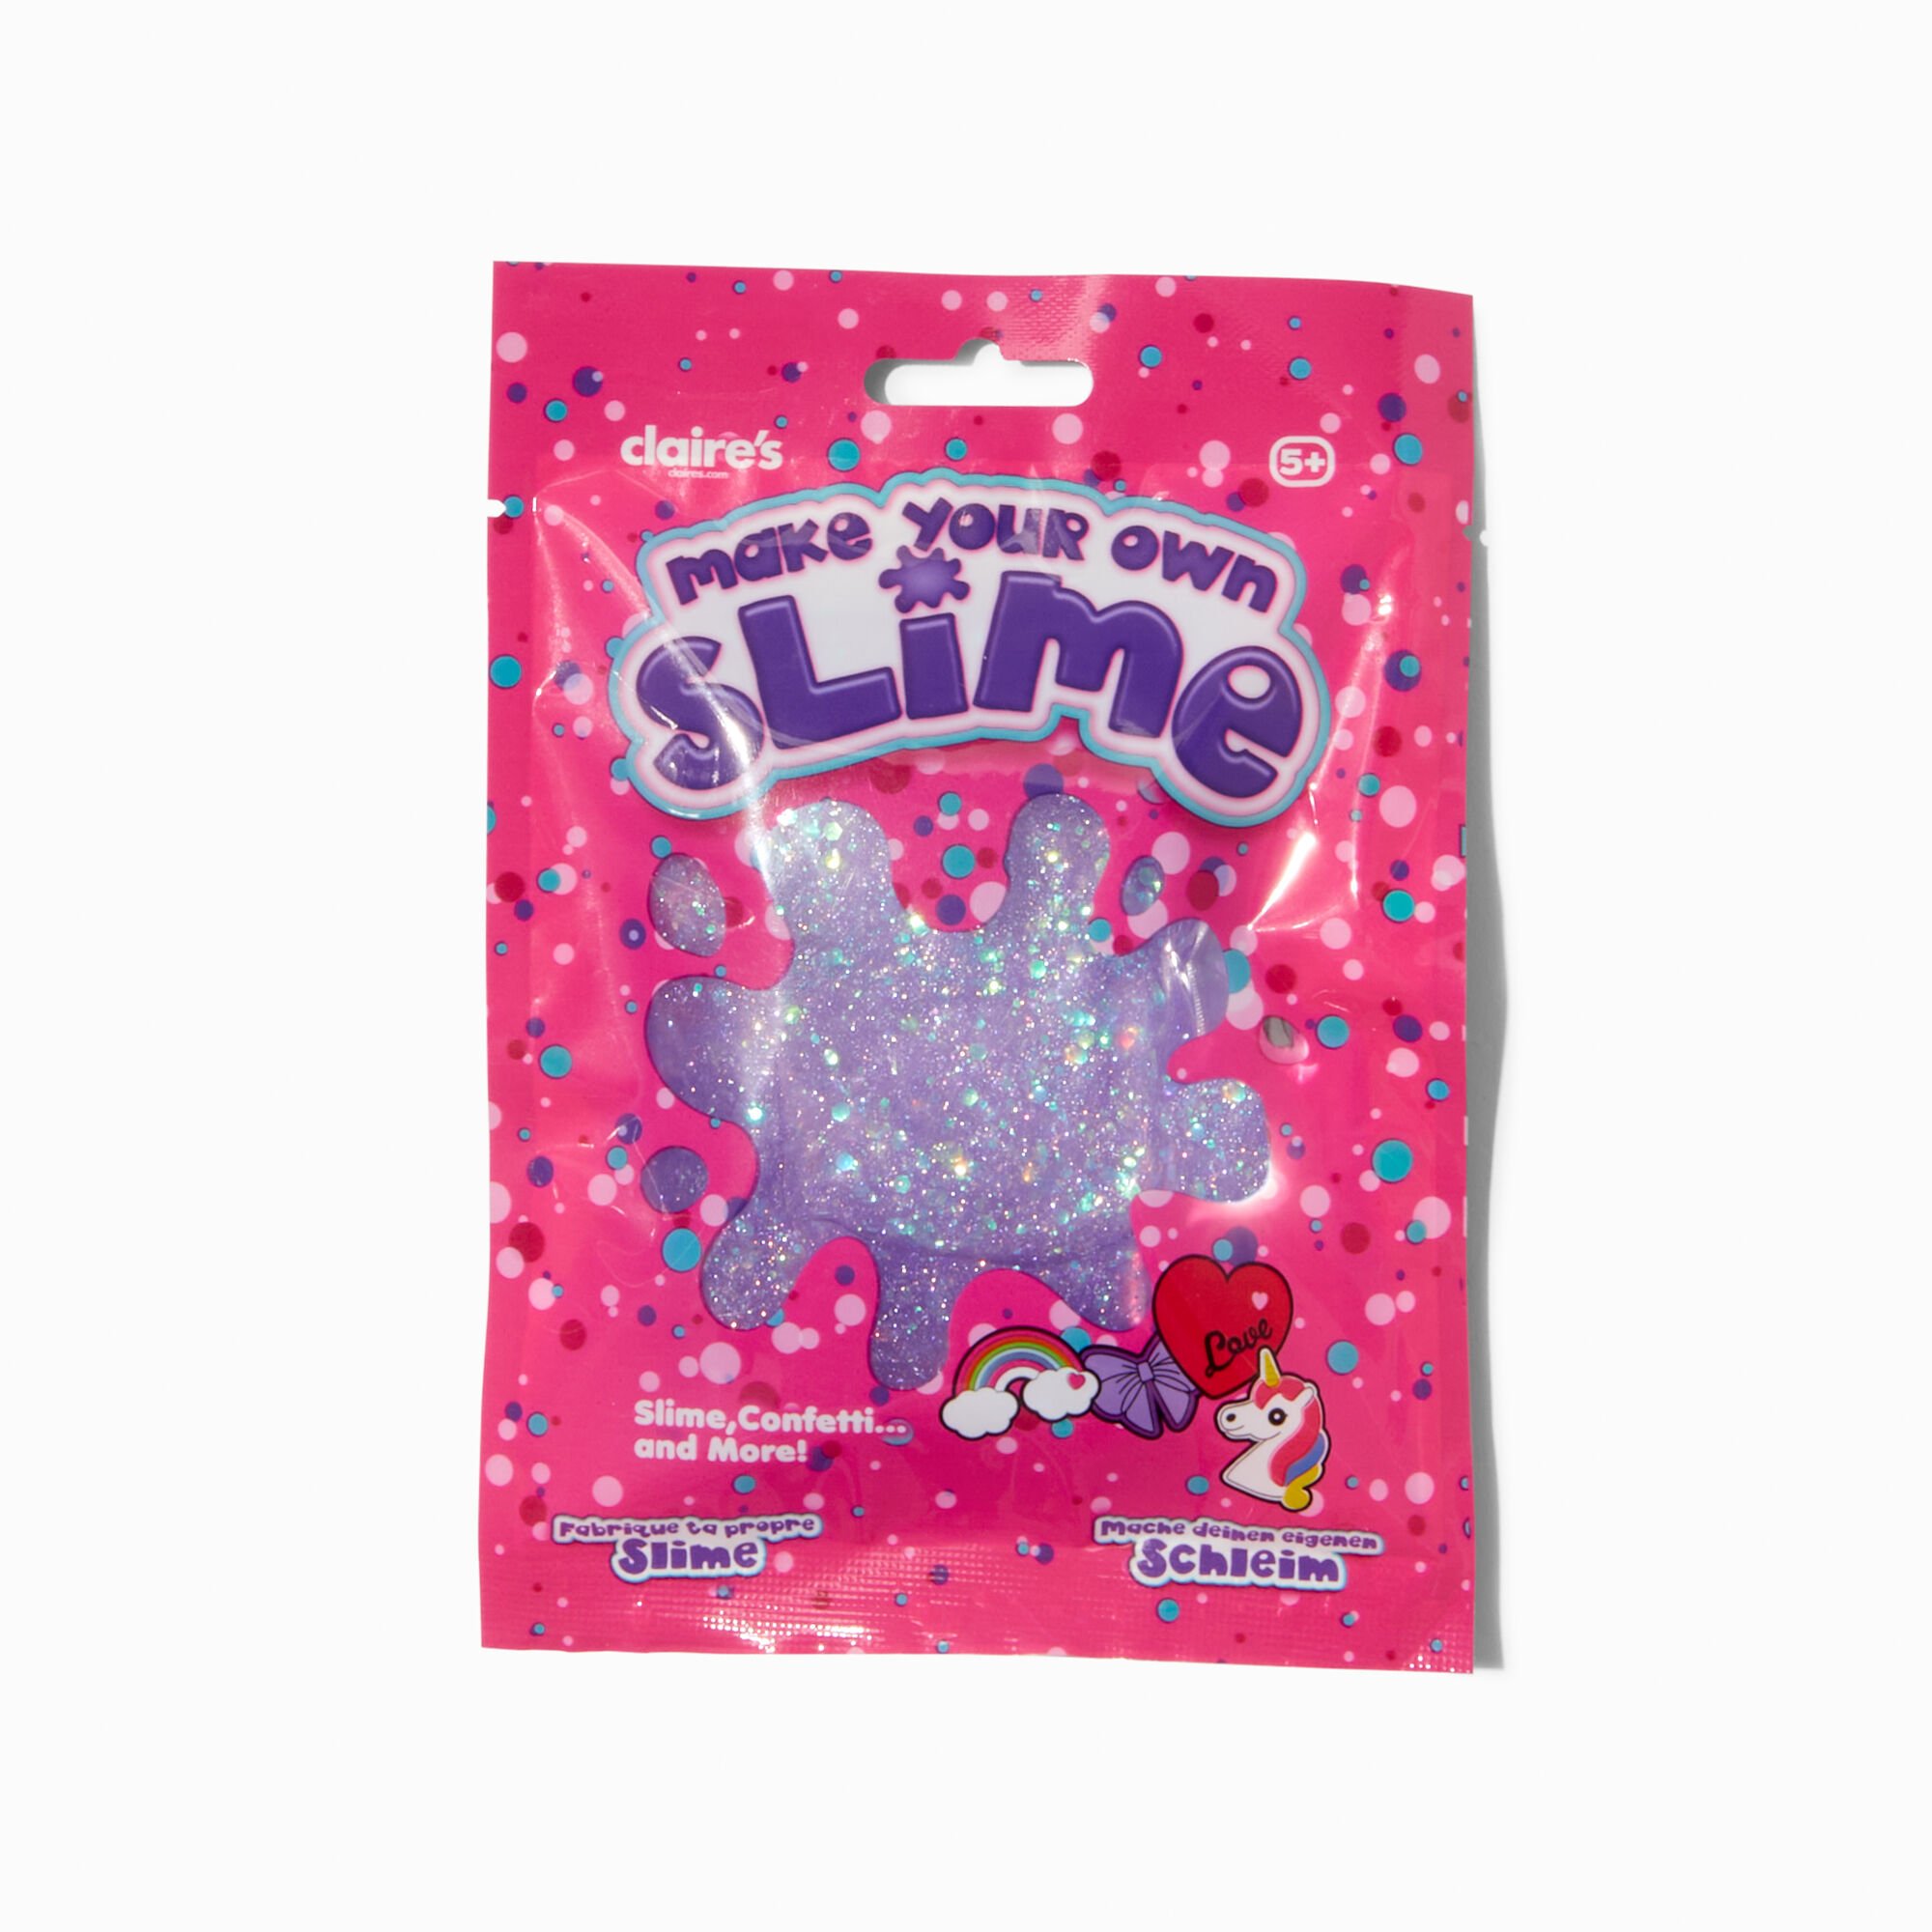 View Claires Make Your Own Slime Blind Bag Styles Vary information